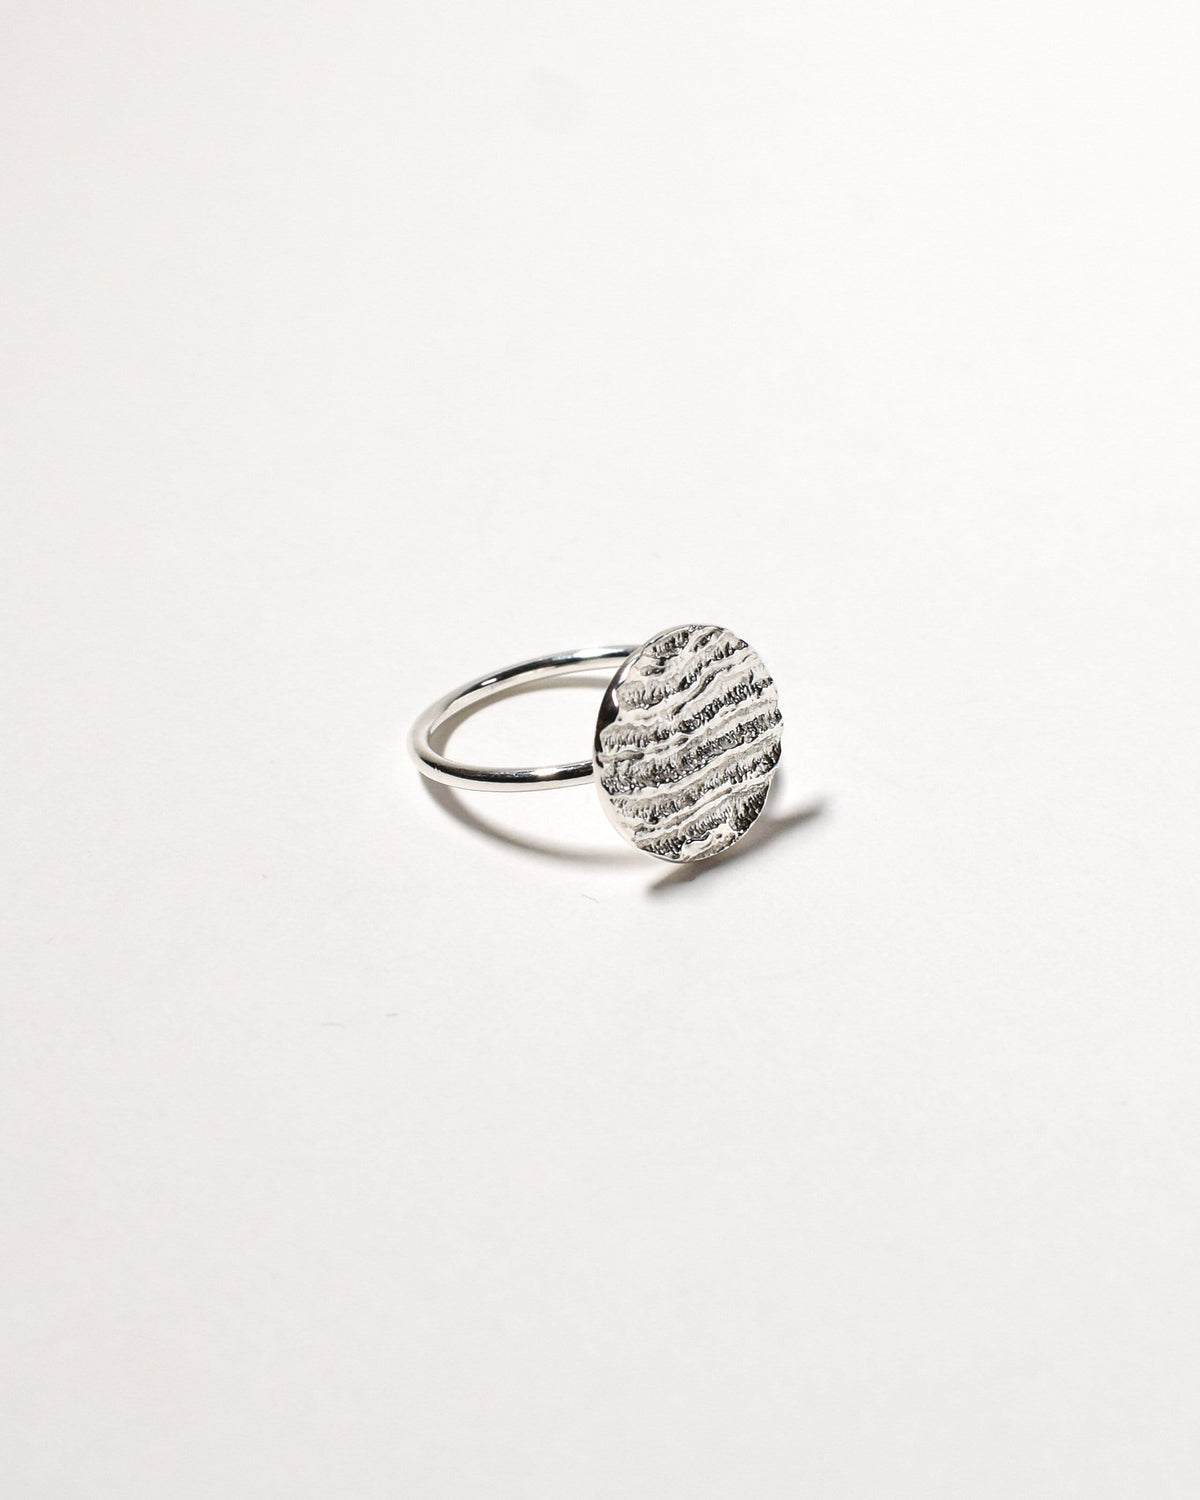 Kutti Ring (Large). Sterling Silver